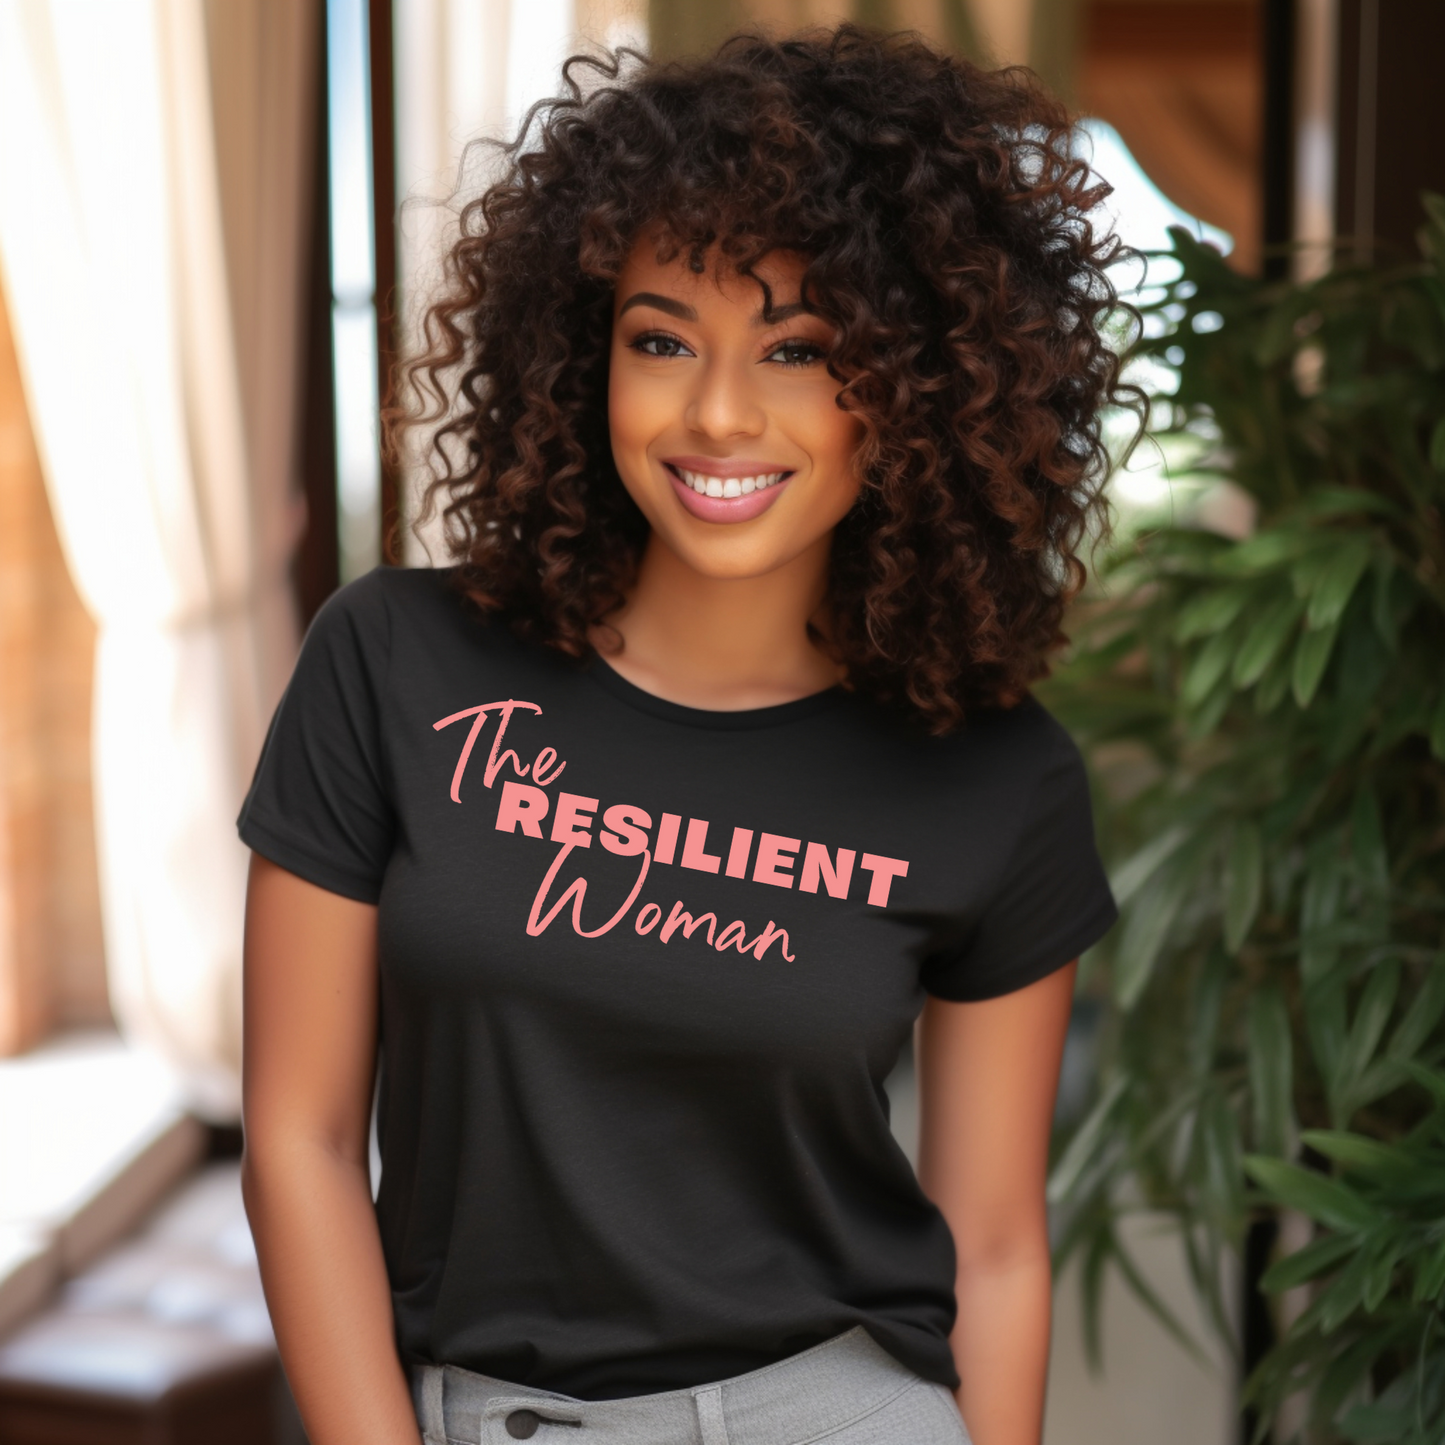 The Resilient Woman Tee